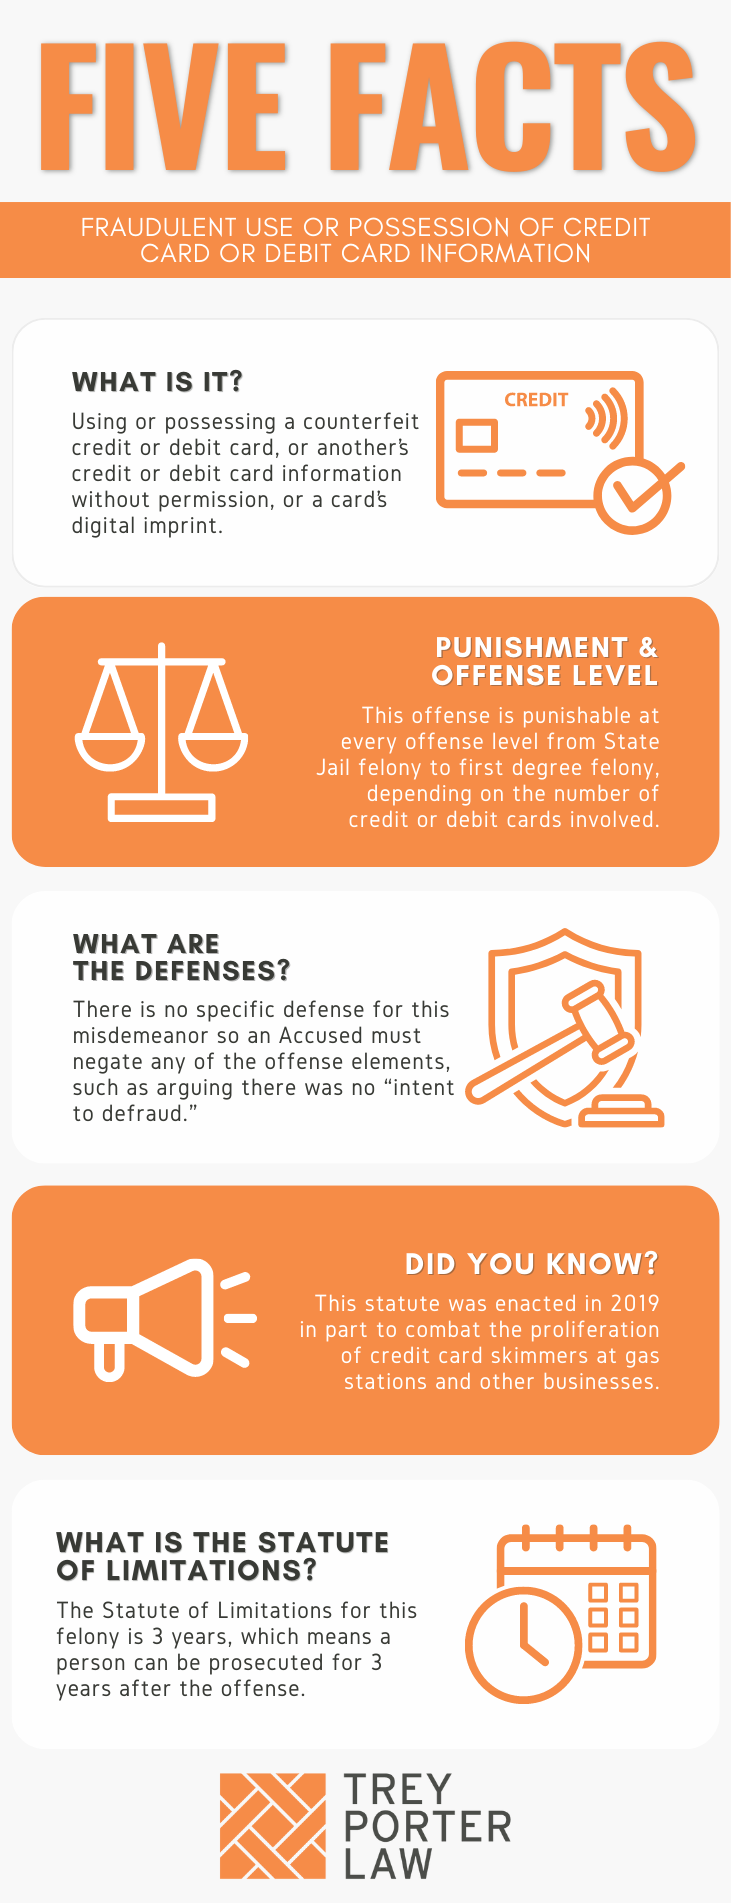 Texas Penal Code 32.315 - Fraudulent Use or Possession of Credit Card or Debit Card Information